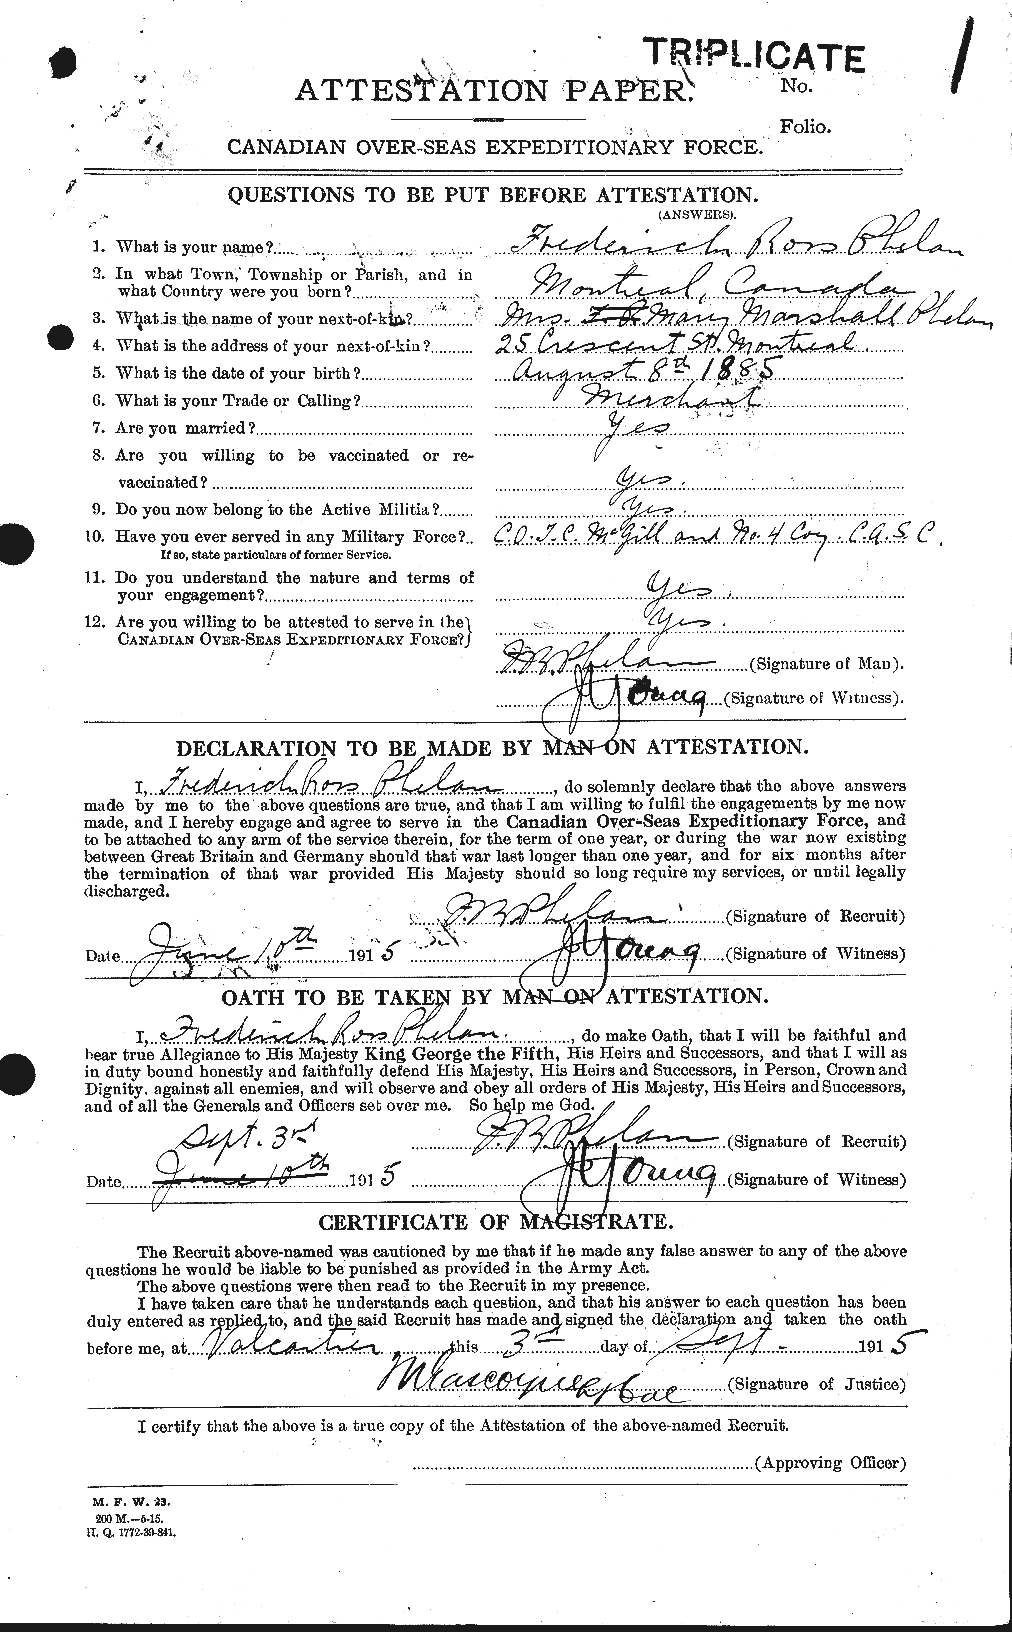 Personnel Records of the First World War - CEF 576945a